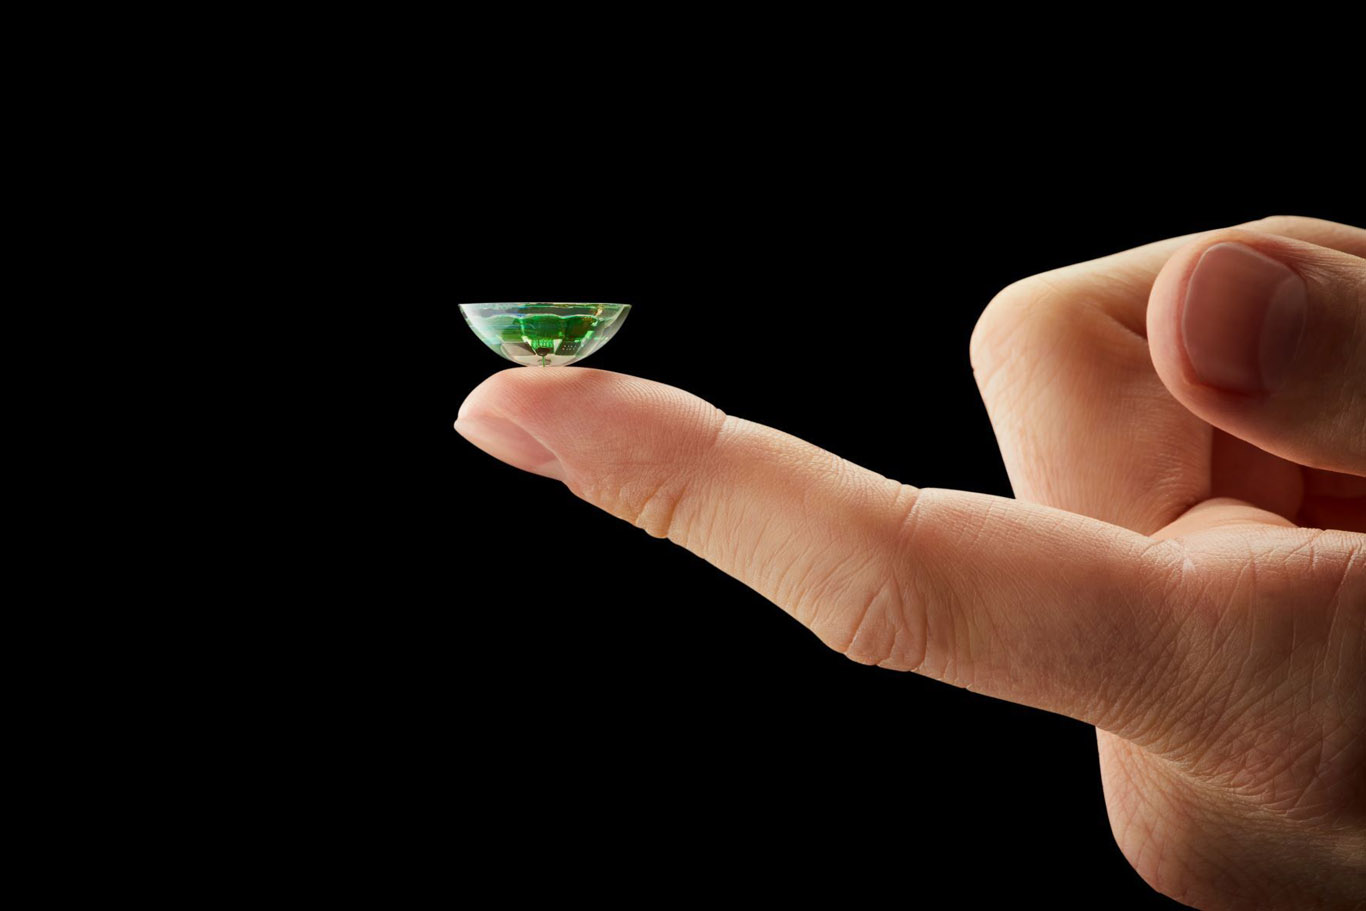 mojo vision smart contact lens feature complete